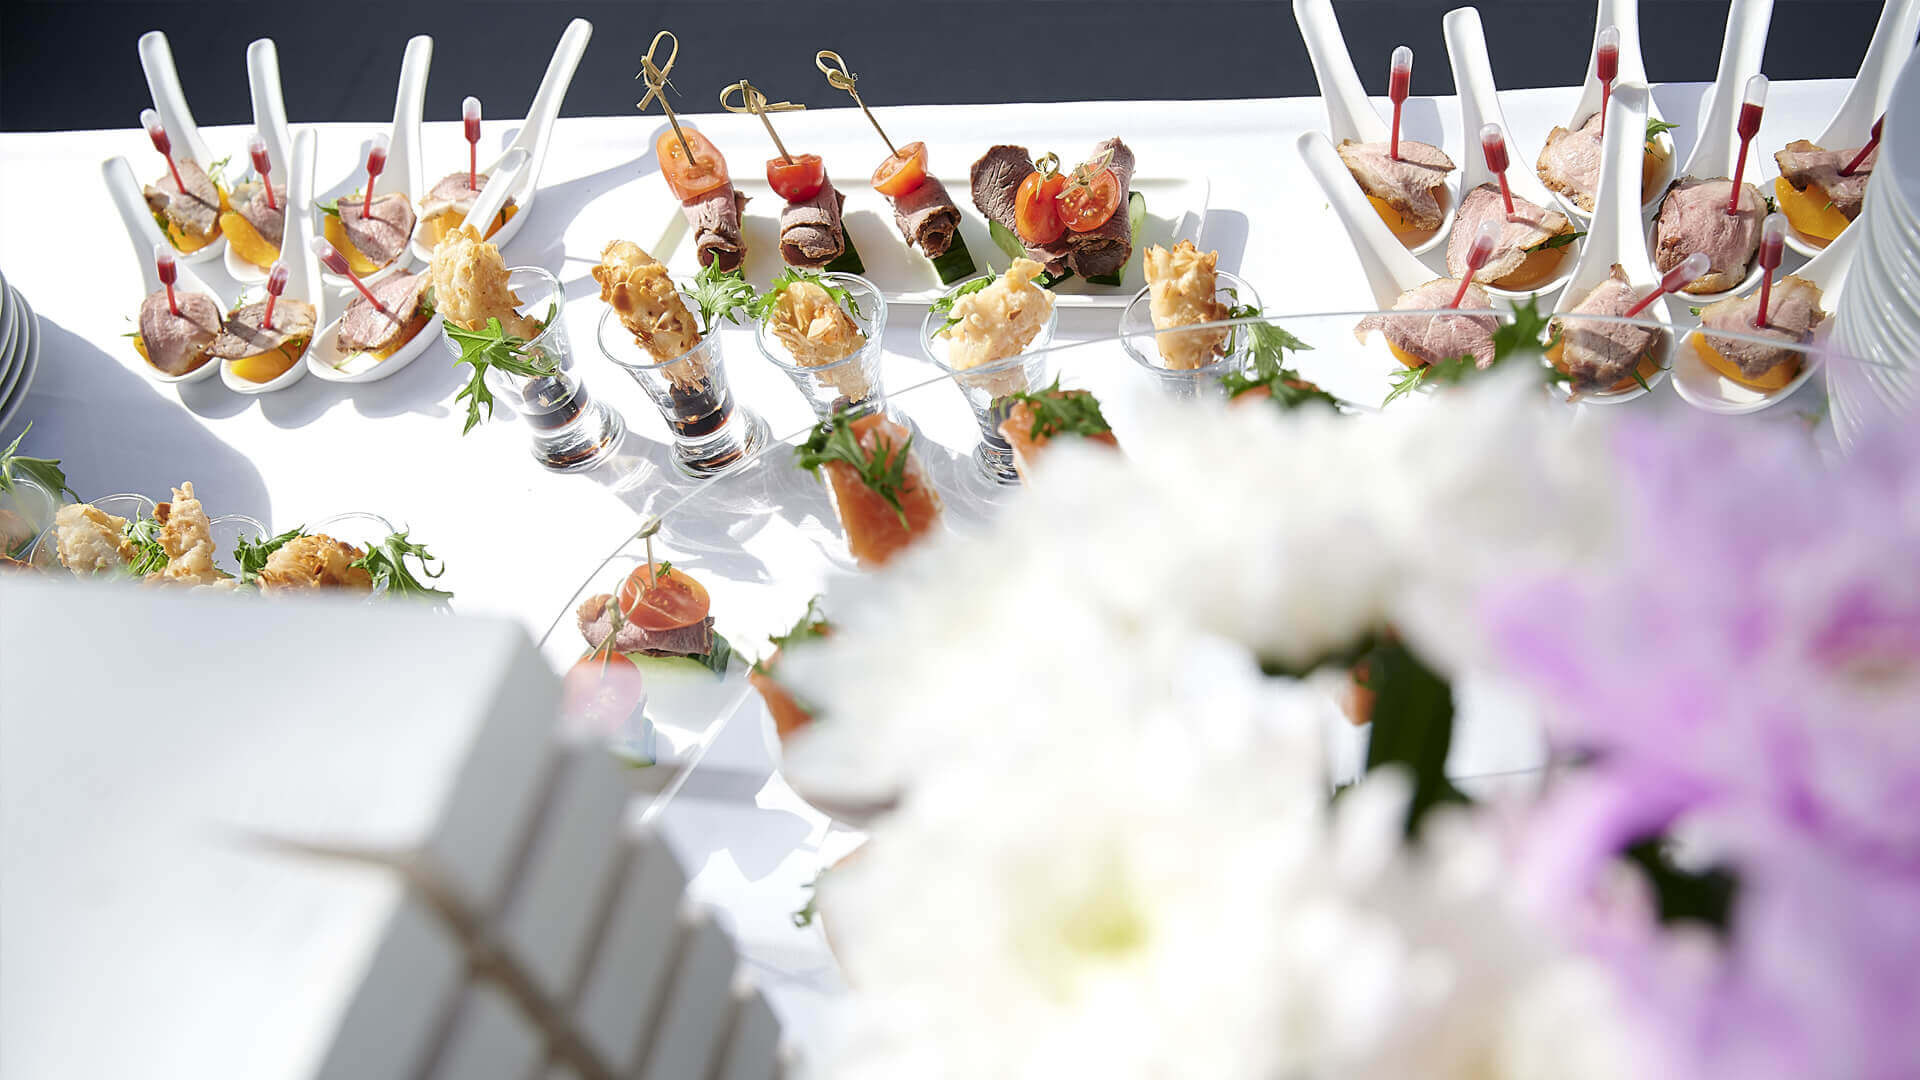 How to organize a catering business